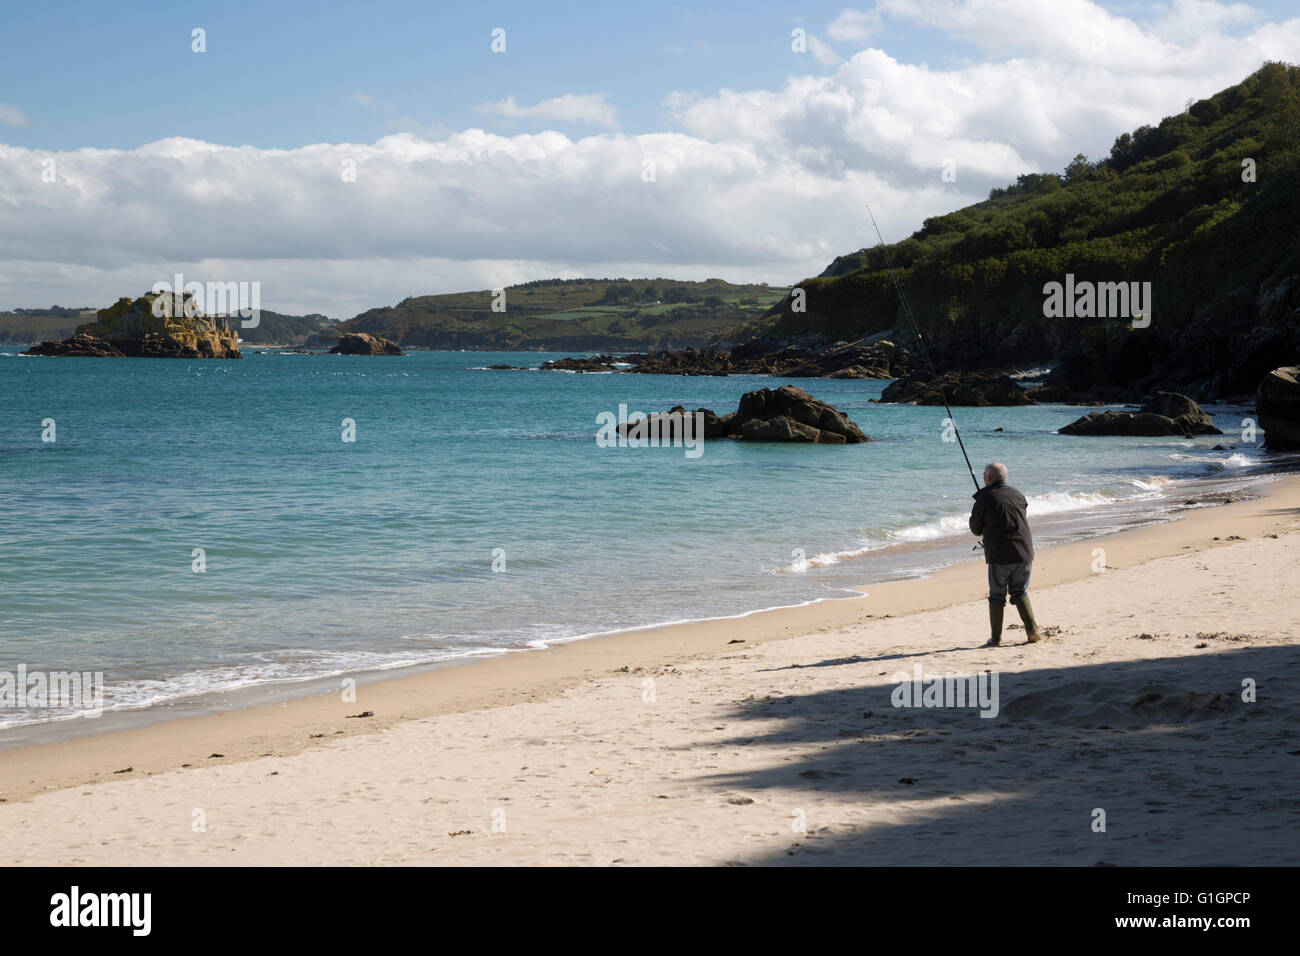 Beg An Fry beach, Locquirec, Finistere, Brittany, France, Europe Stock Photo